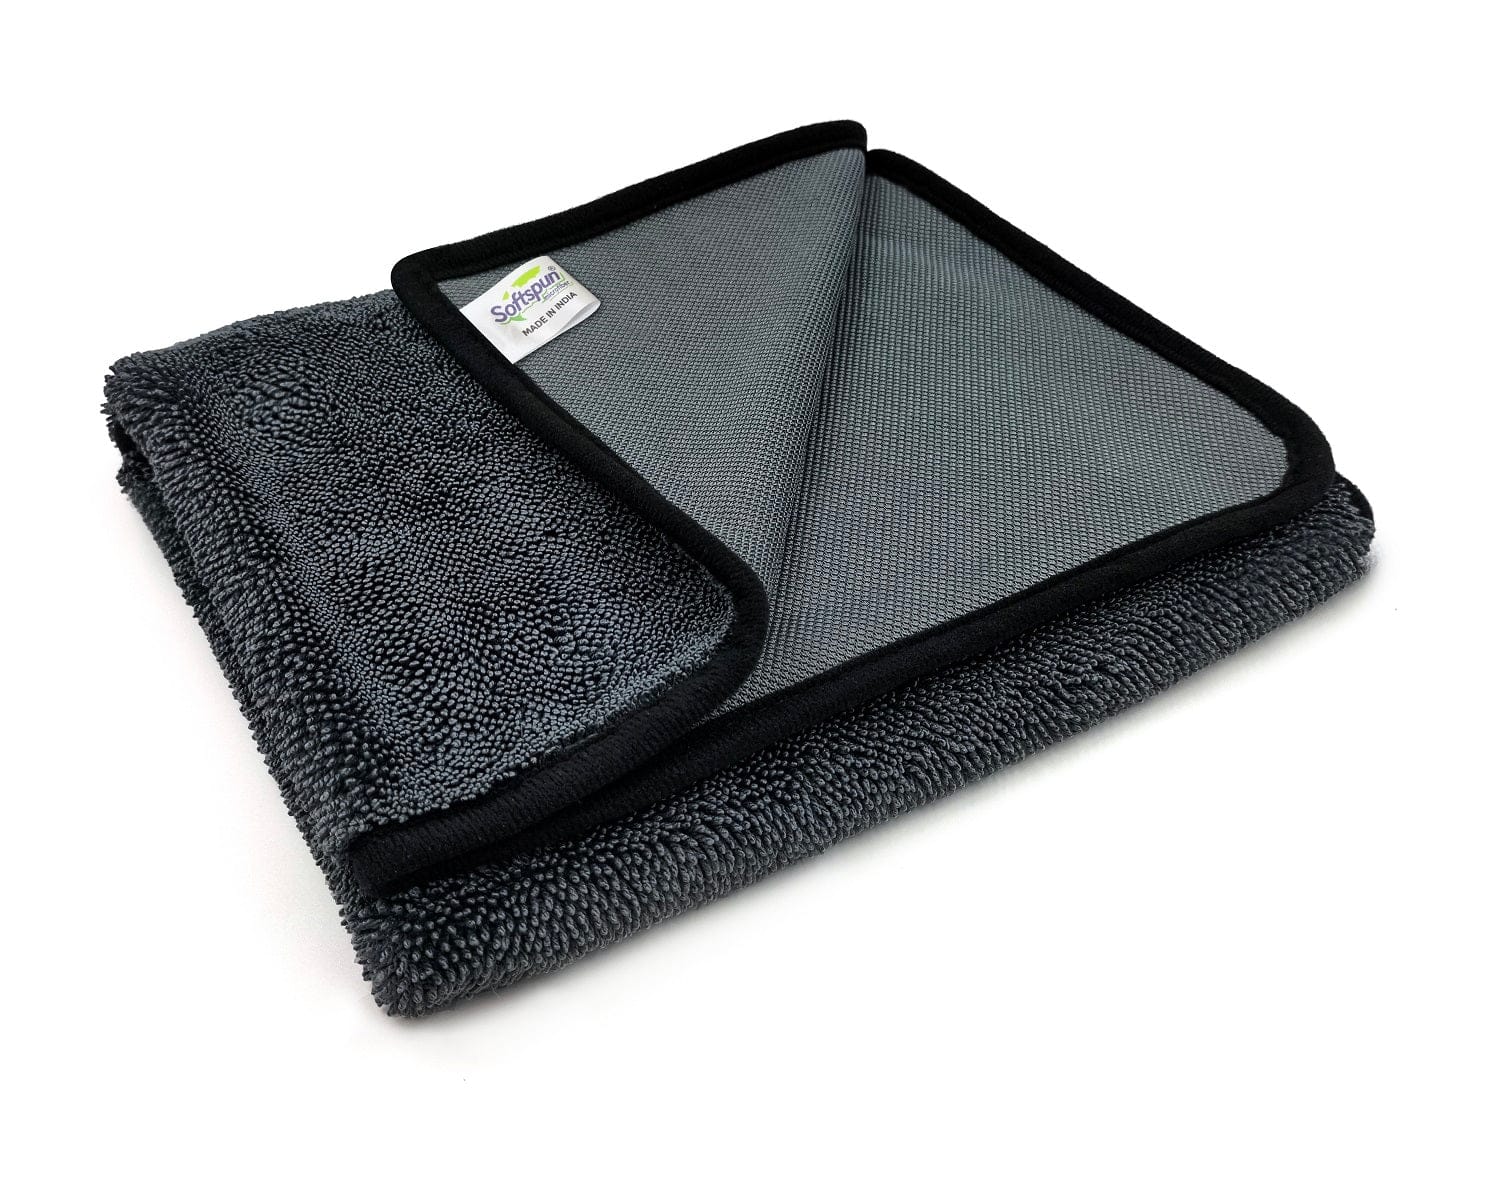 SOFTSPUN Microfiber Cloth for Car - 800 GSM, Grey Twisted Loop Super Absorbent Towel - Edgeless Design with Plush Pile and Lint Free Cloth for Drying and Detailing.